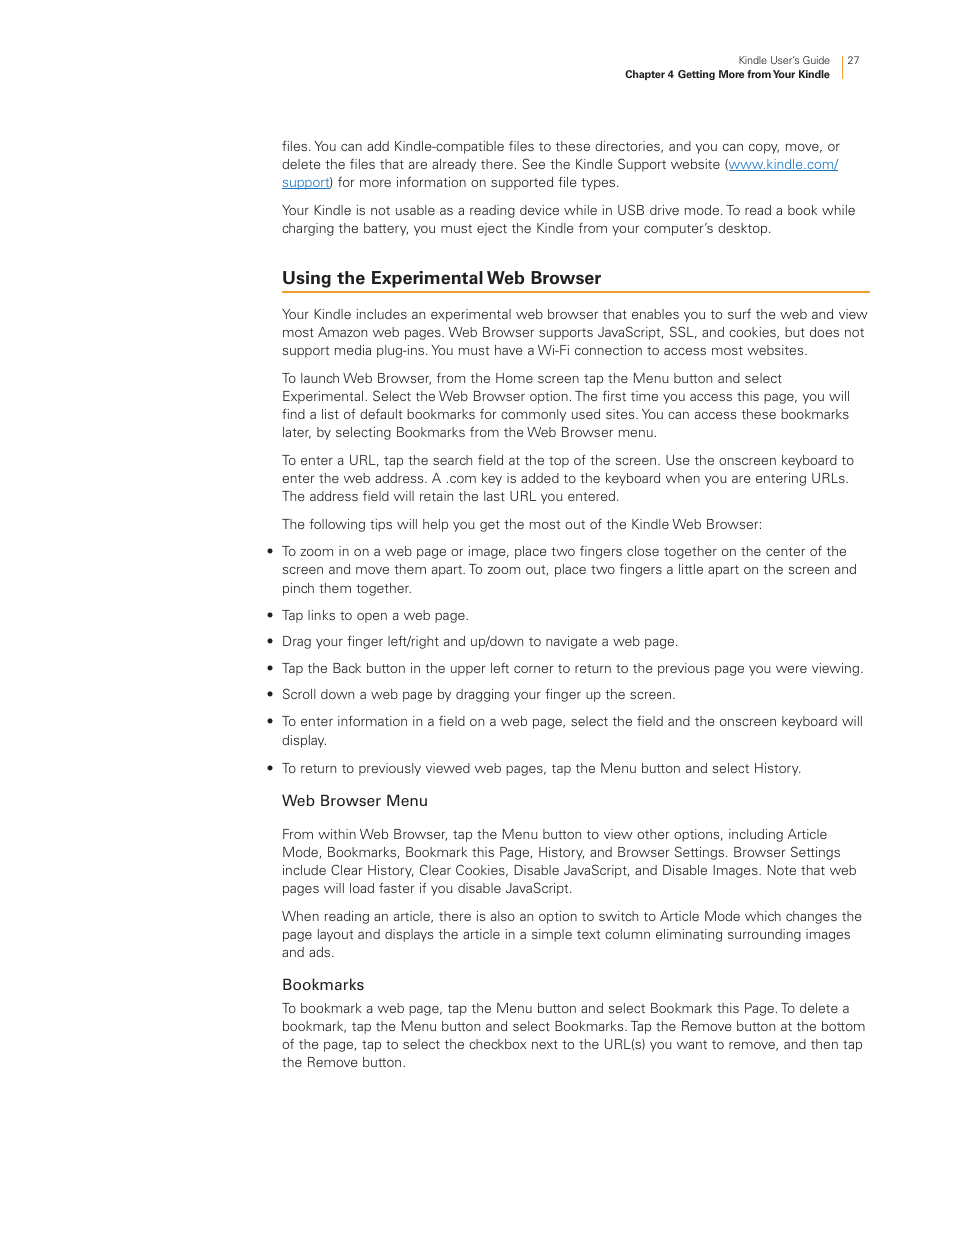 Using the experimental web browser | Kindle Touch 3G User Manual | Page 27 / 36